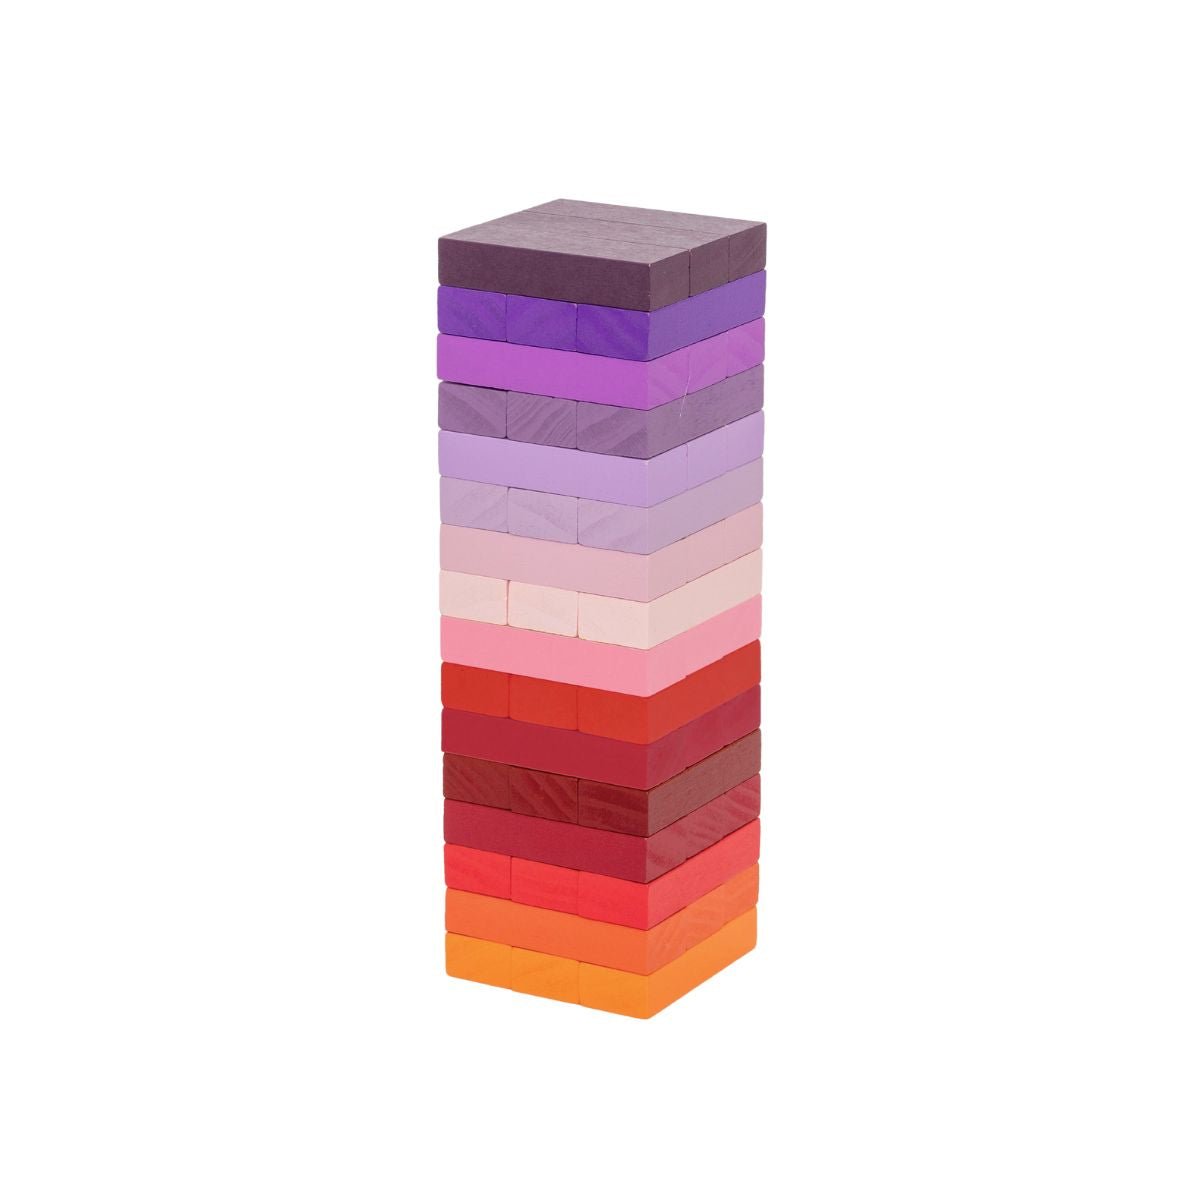 Gradient Tumble Tower Game - Warm - Life of Riley